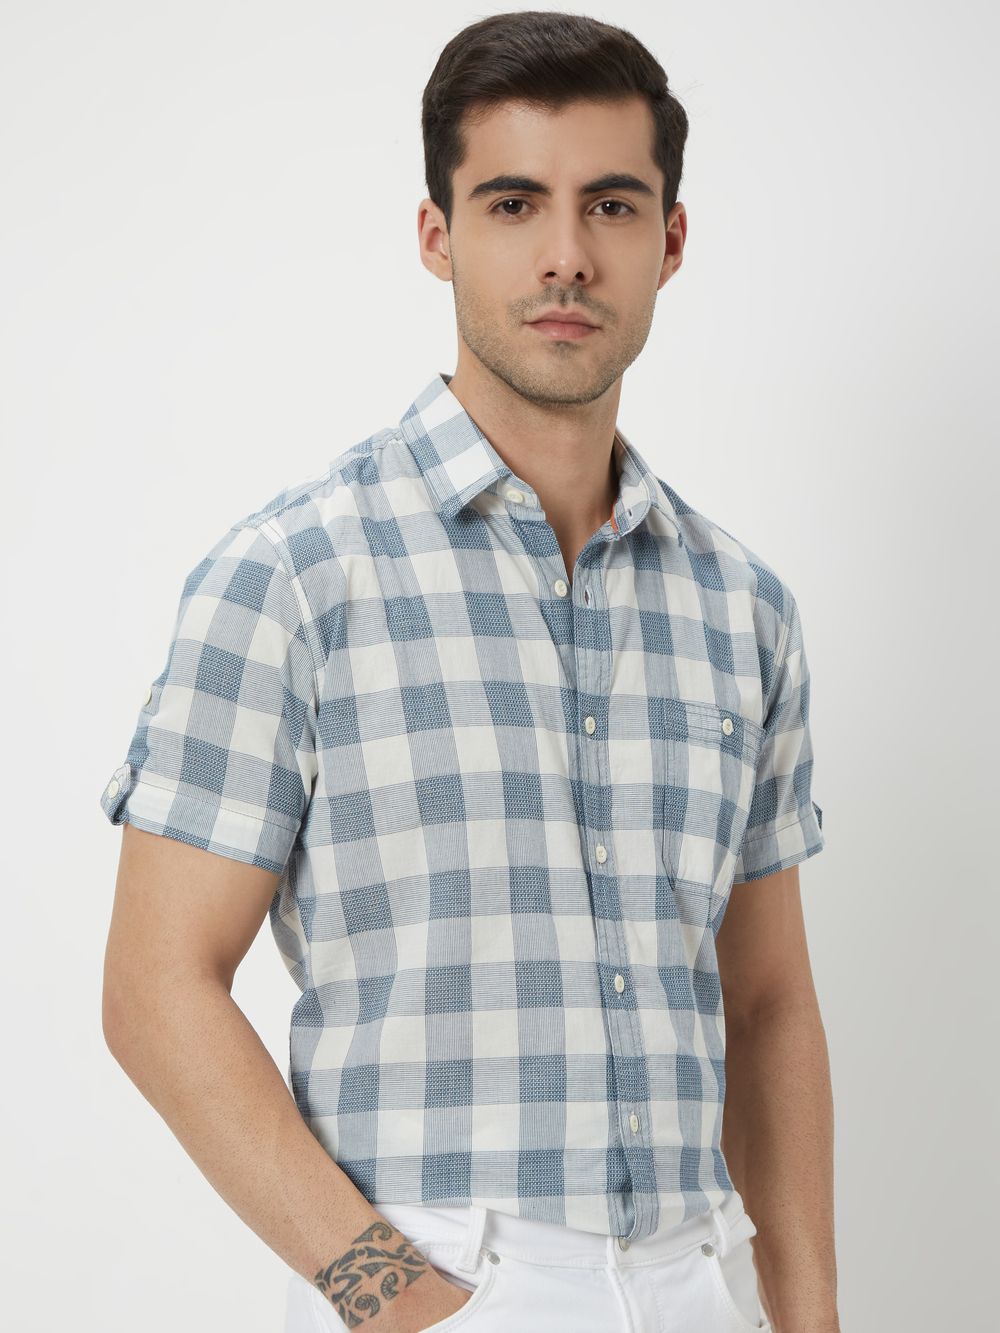 White & Navy Square Check Slim Fit Casual Shirt